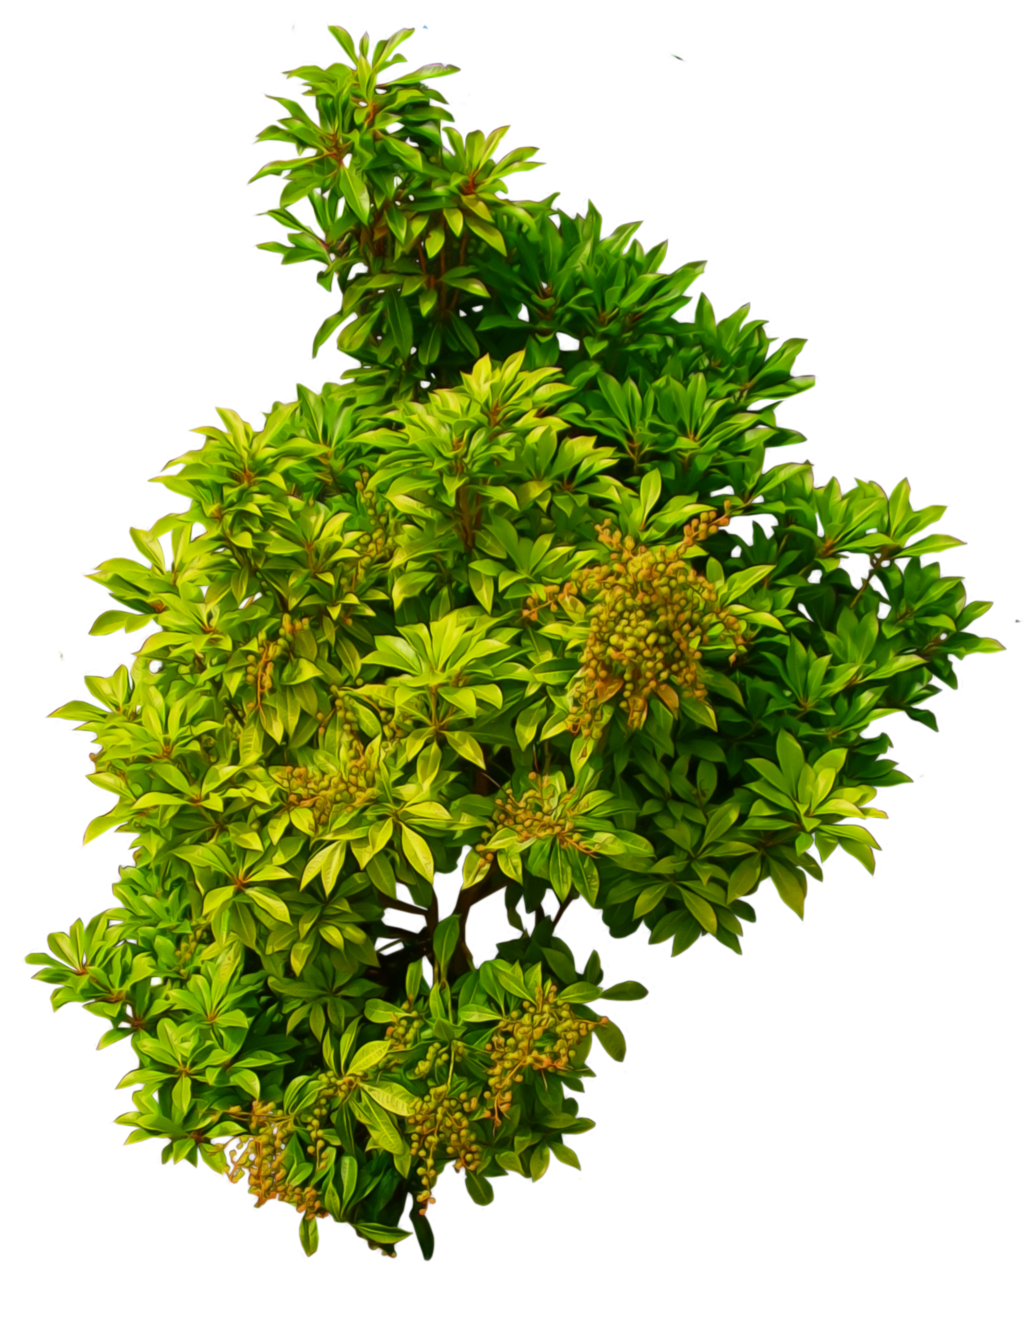 Small Bush PNG Image Background